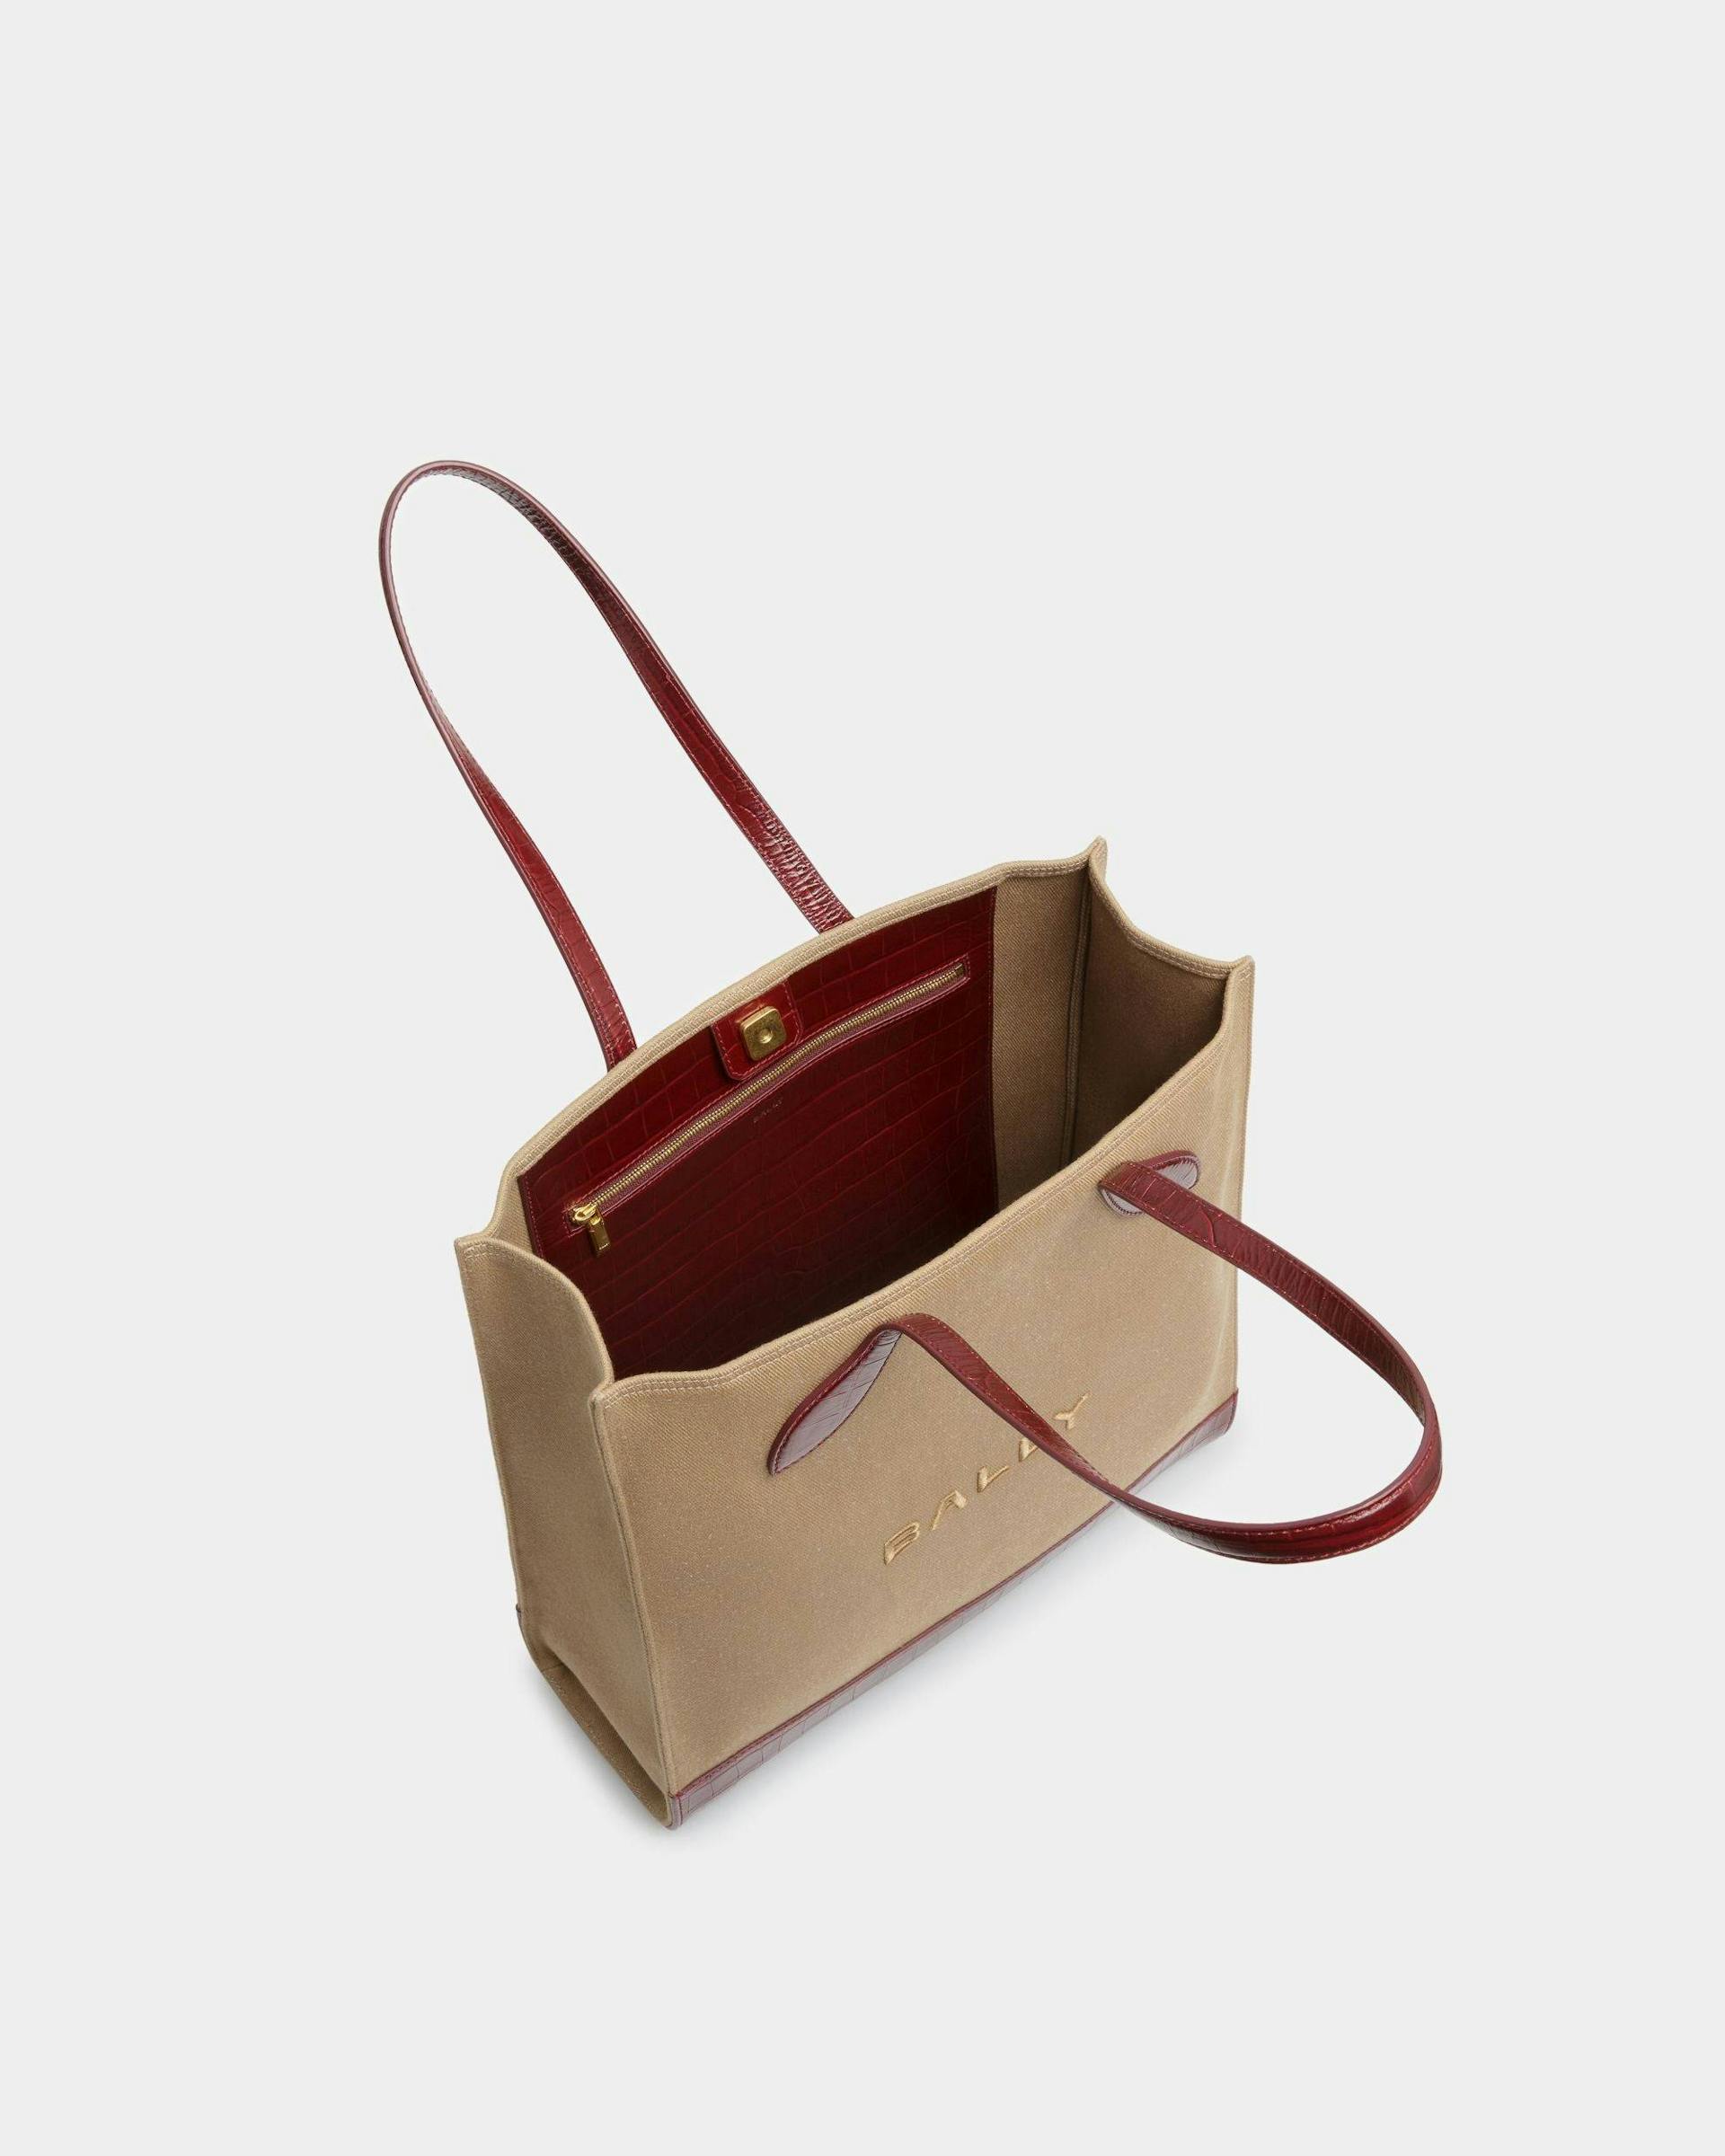 Bar Tote Bag In Sand And Burgundy Fabric - Women's - Bally - 04